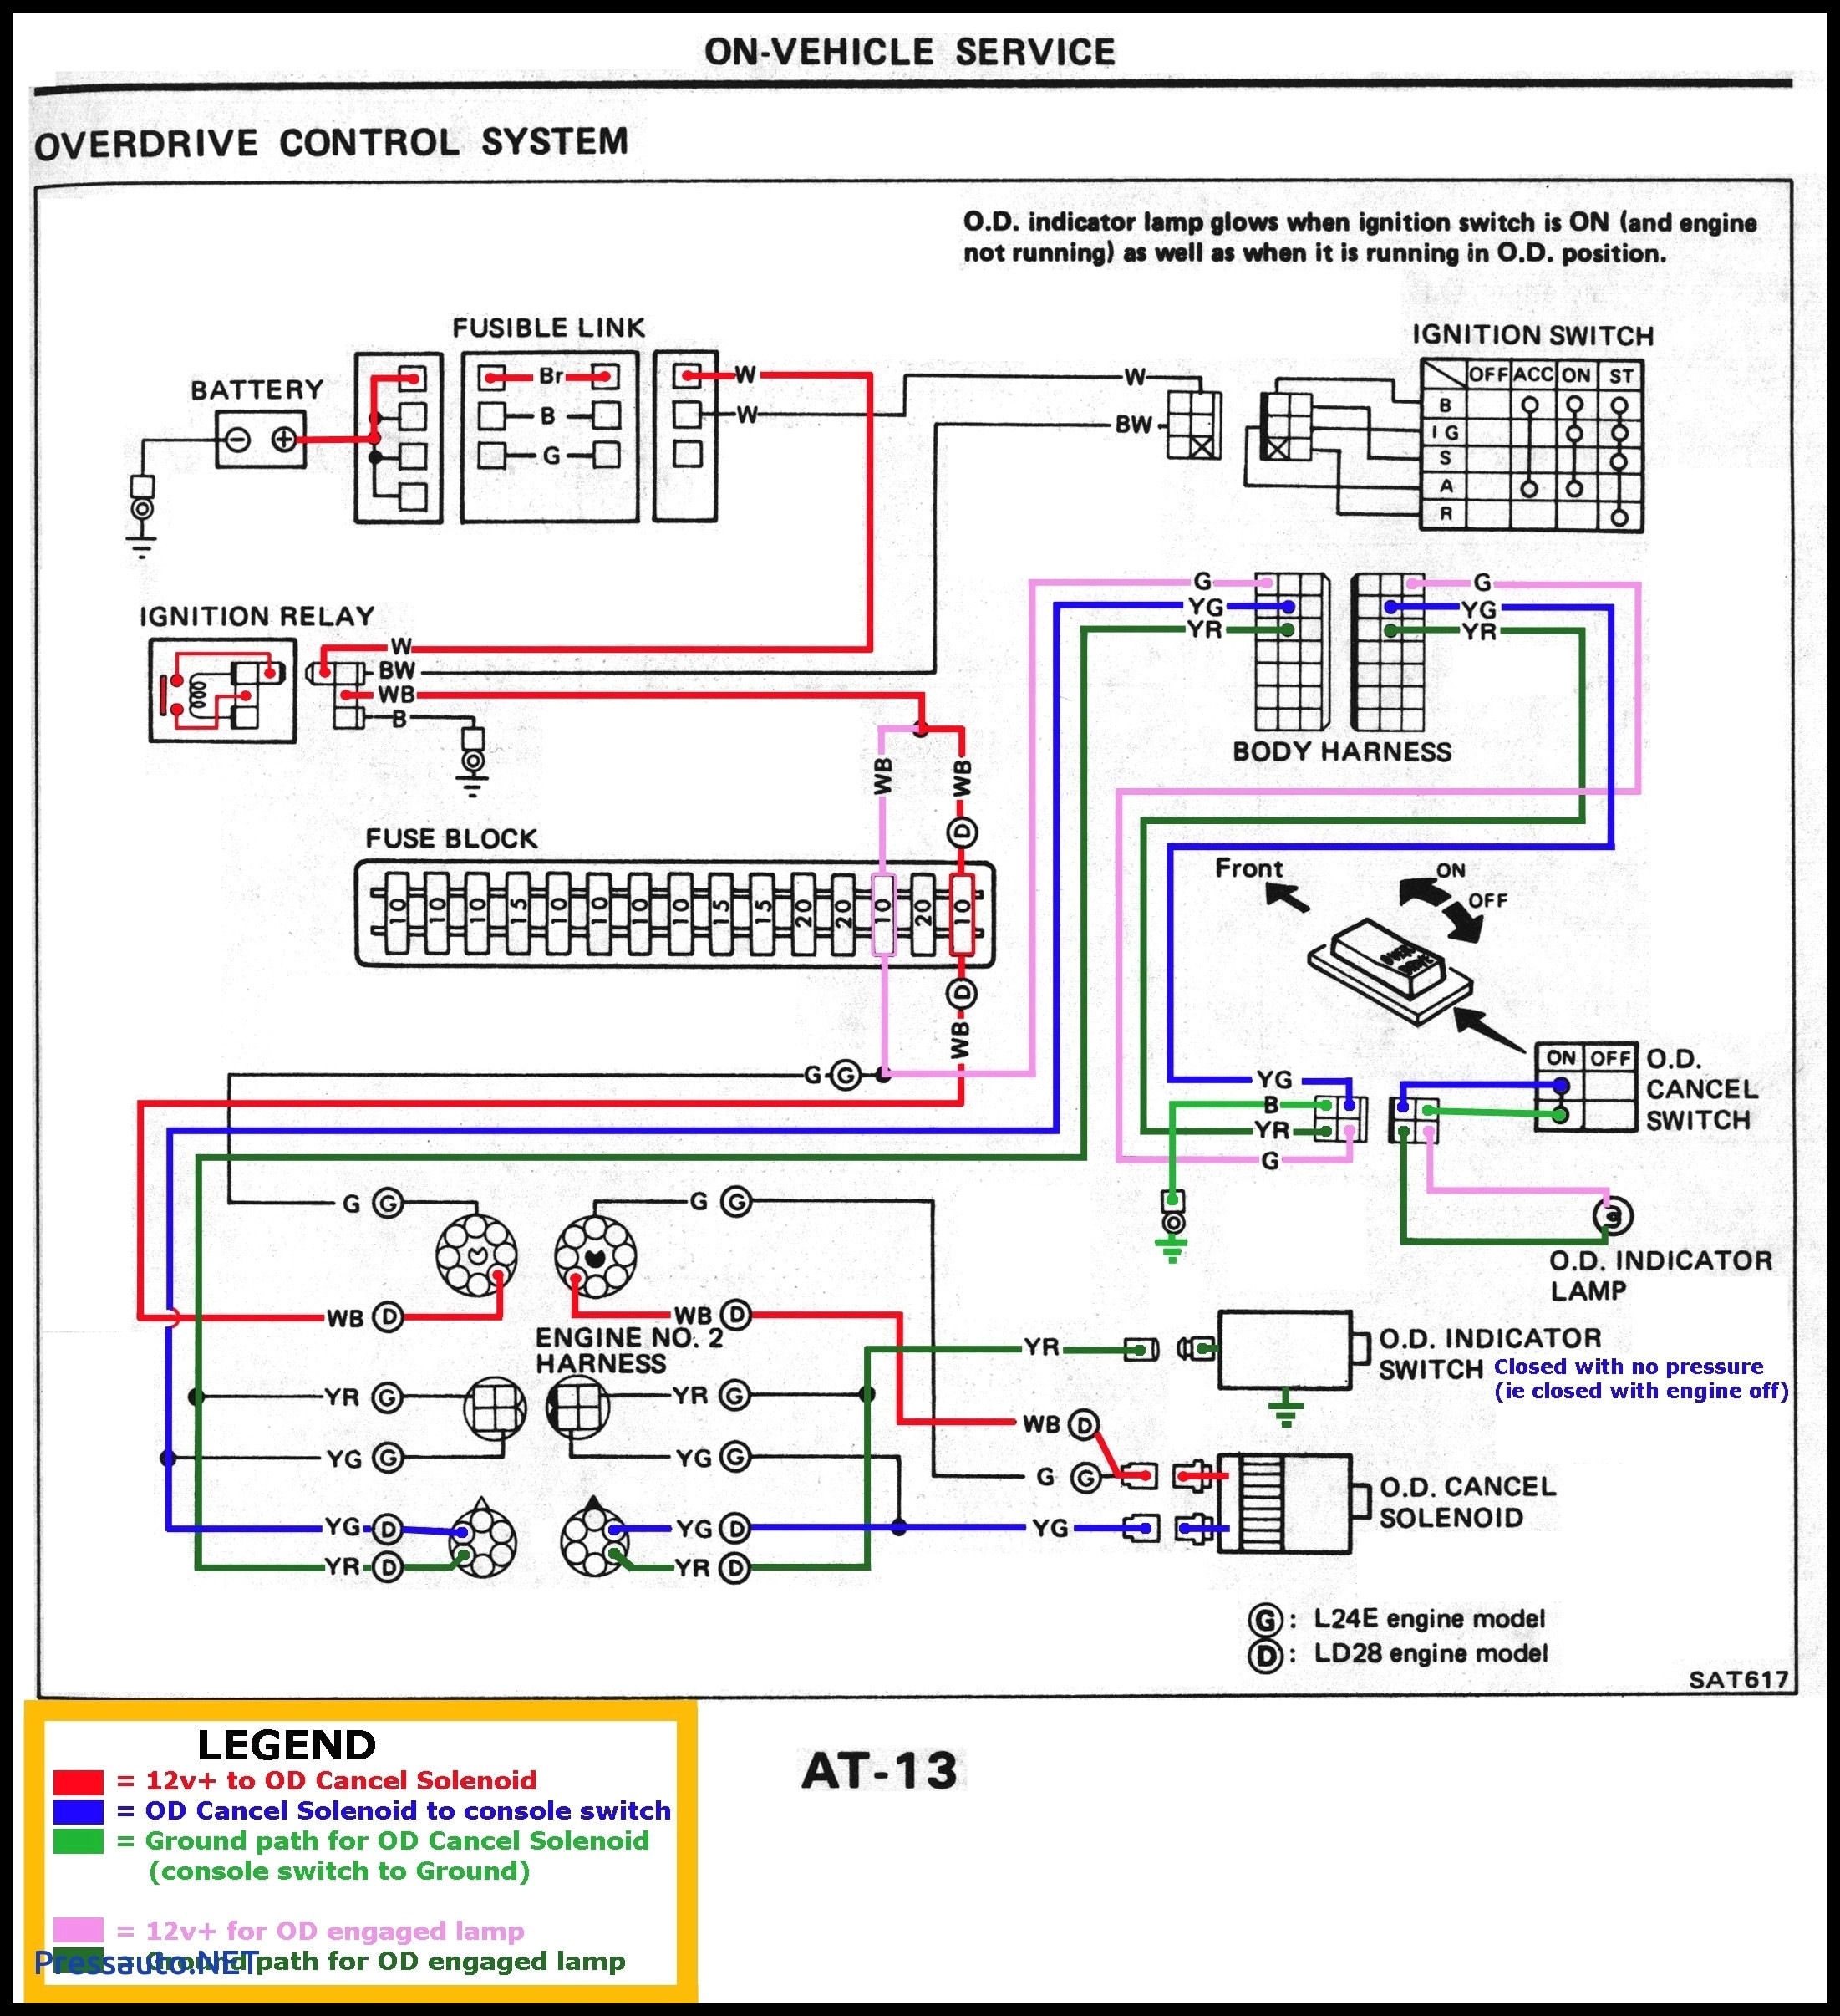 Corolla Toyota Wiring Diagram Color Codes from angiescreation.com